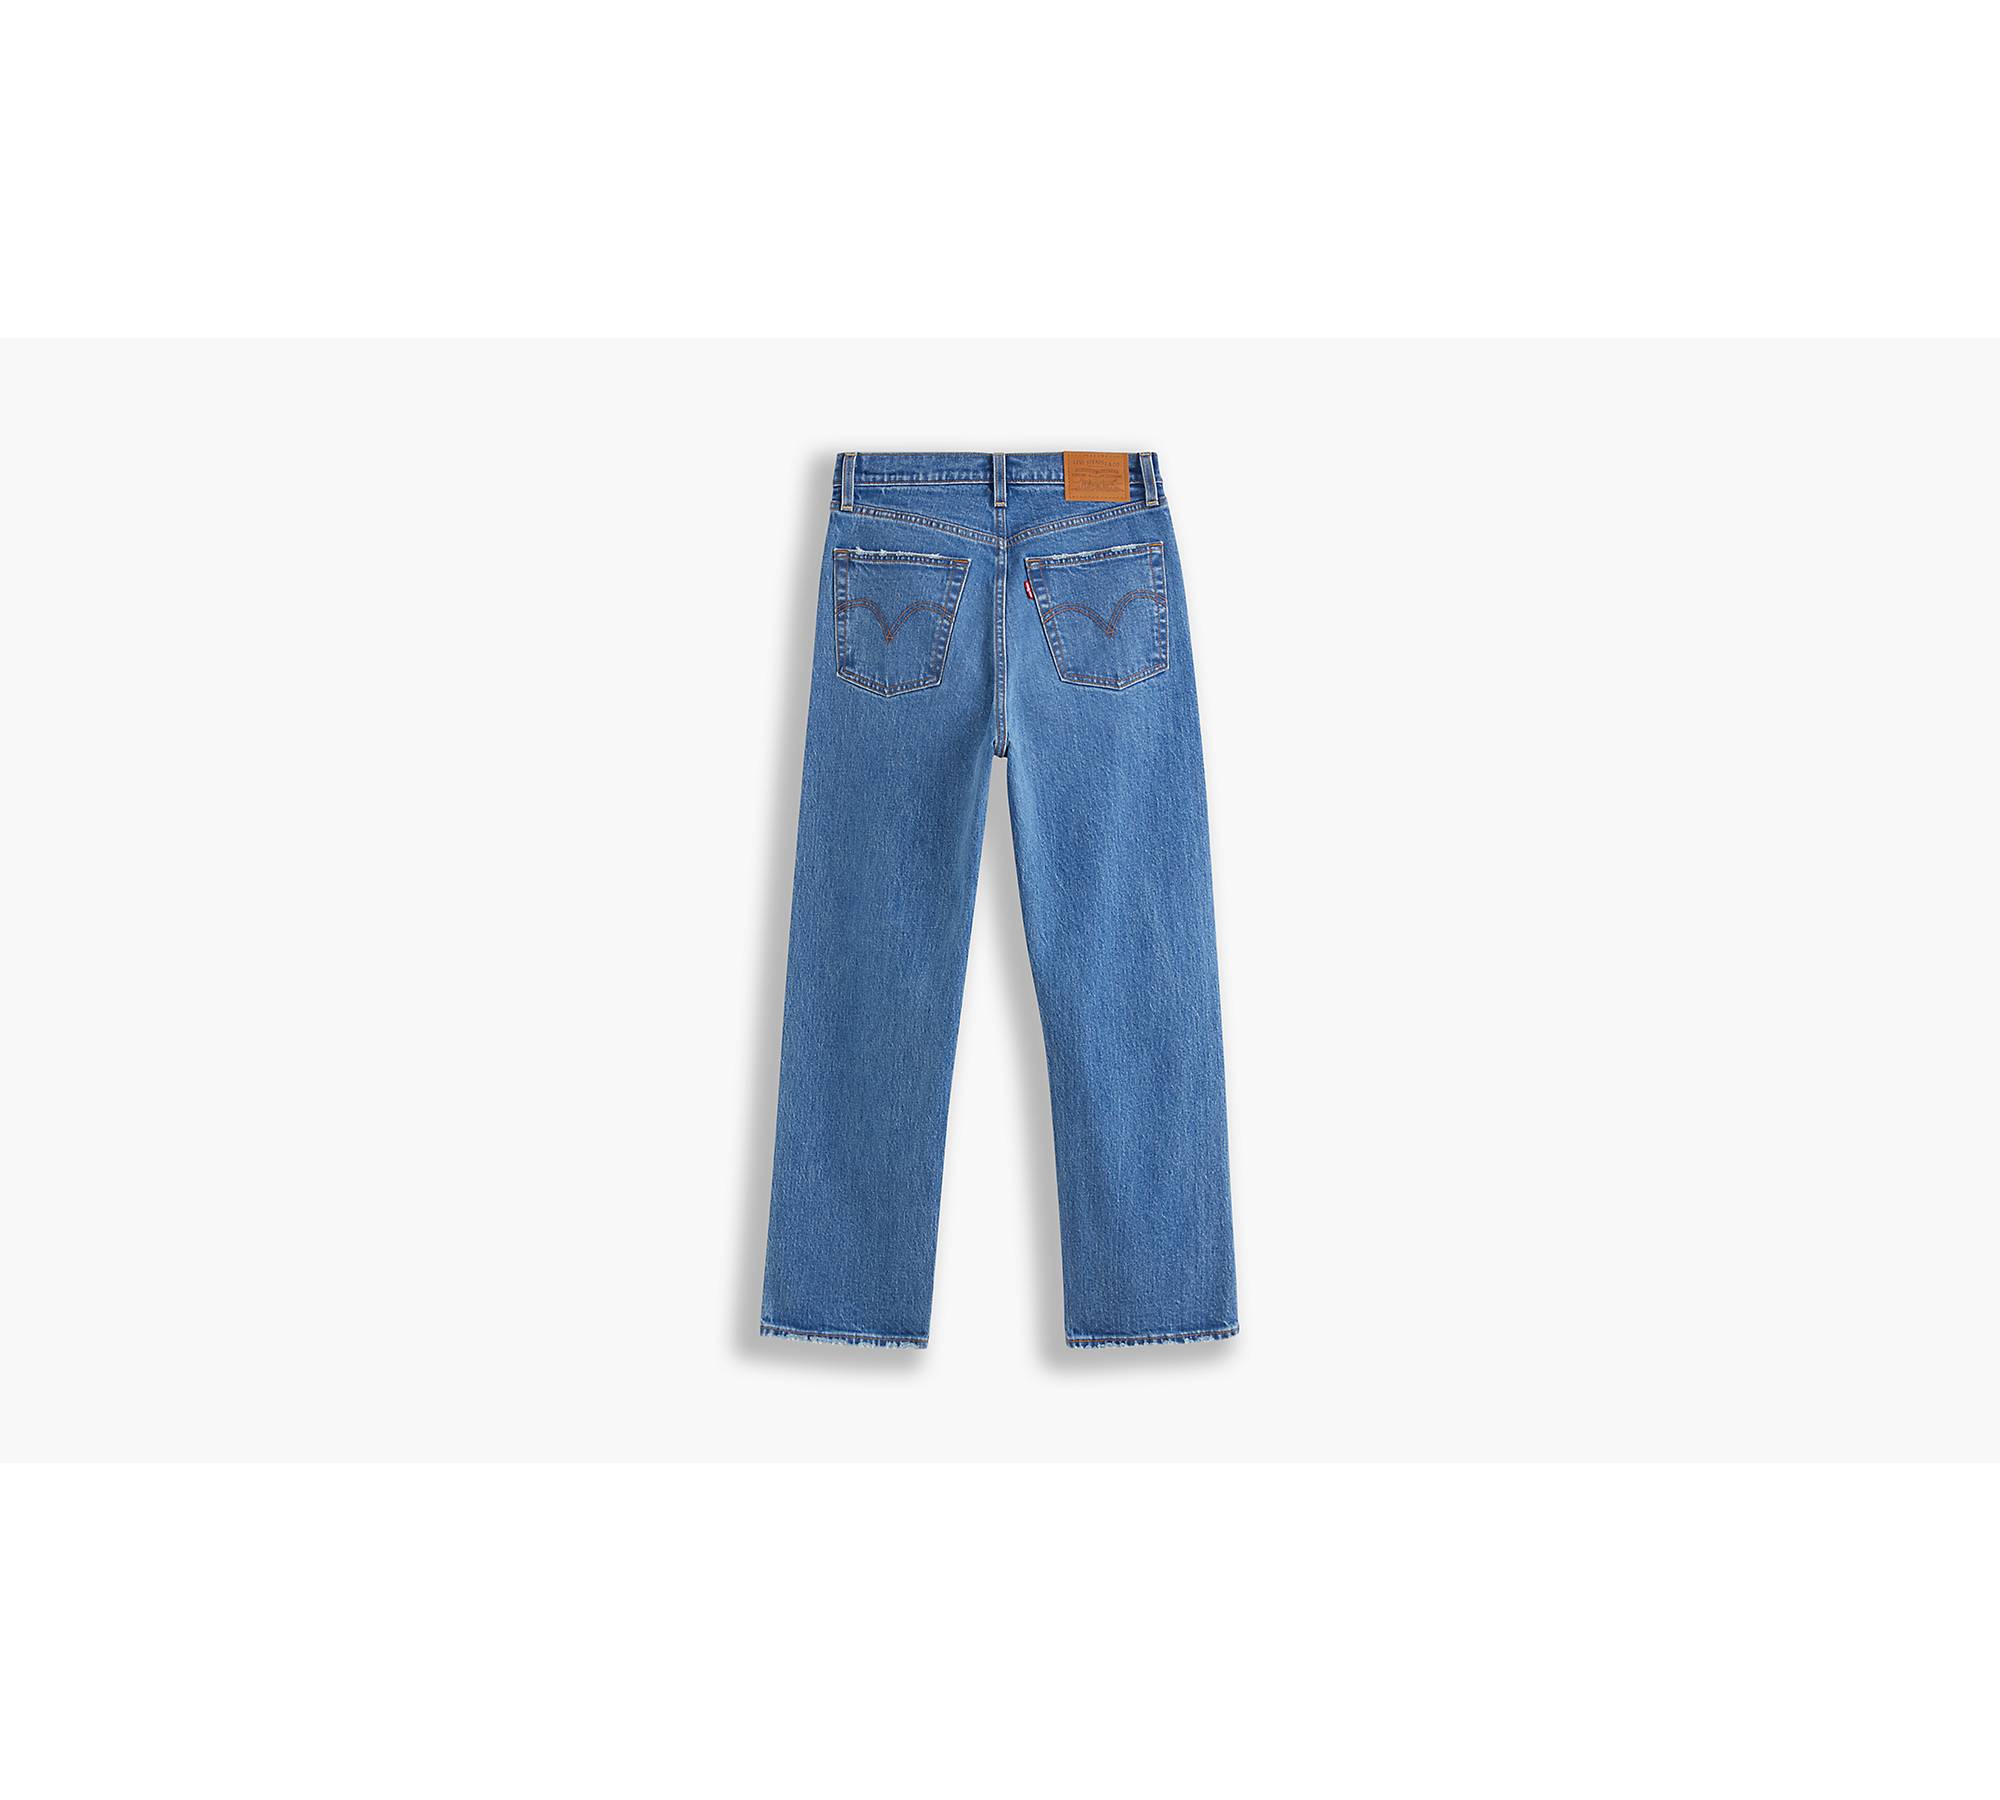 Ribcage Straight Ankle Jeans - Levi's Jeans, Jackets & Clothing